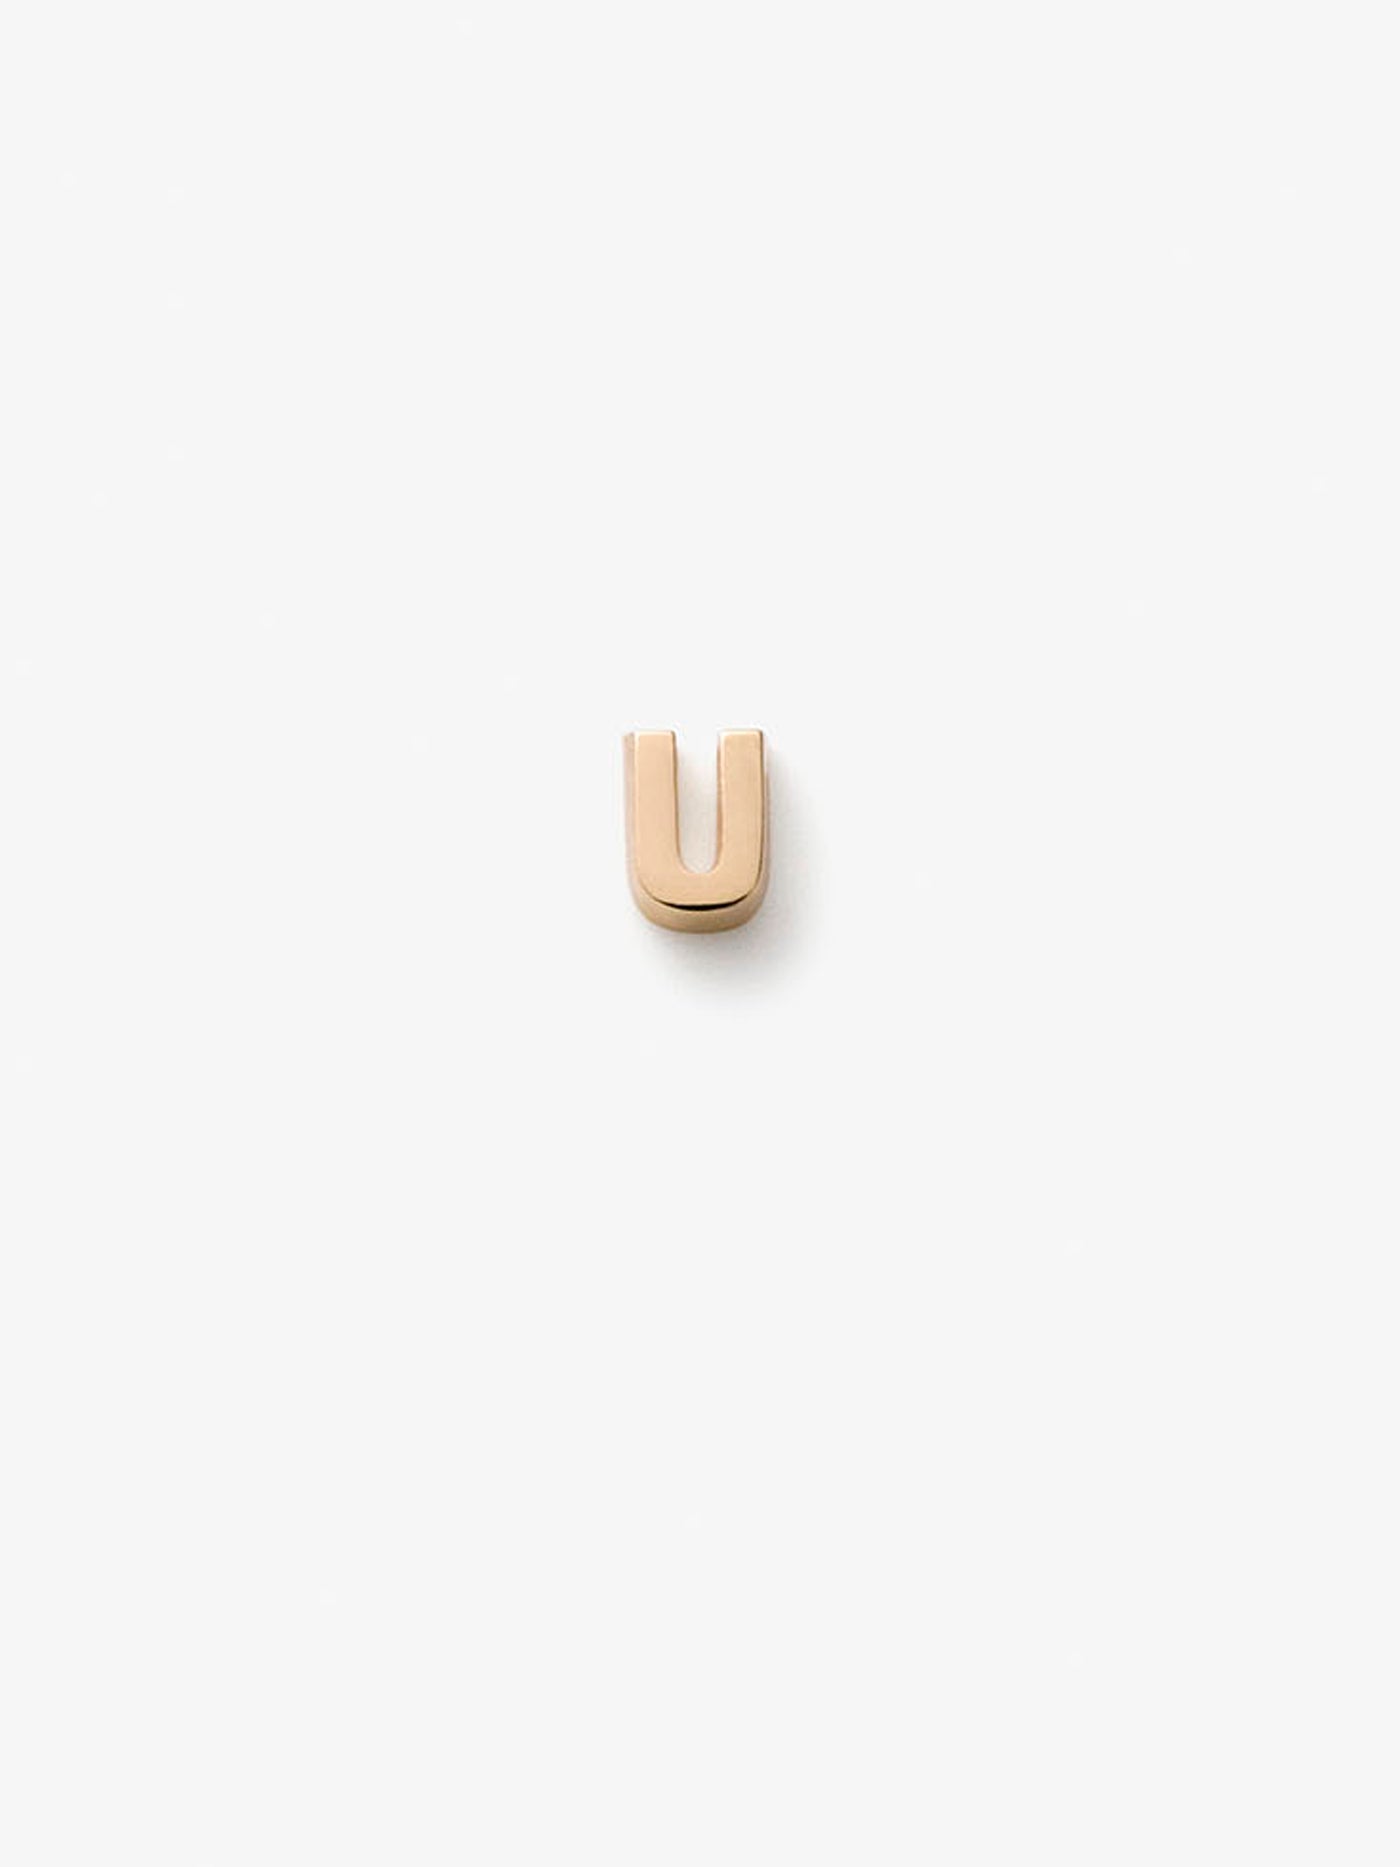 One Letter U in 18k Gold